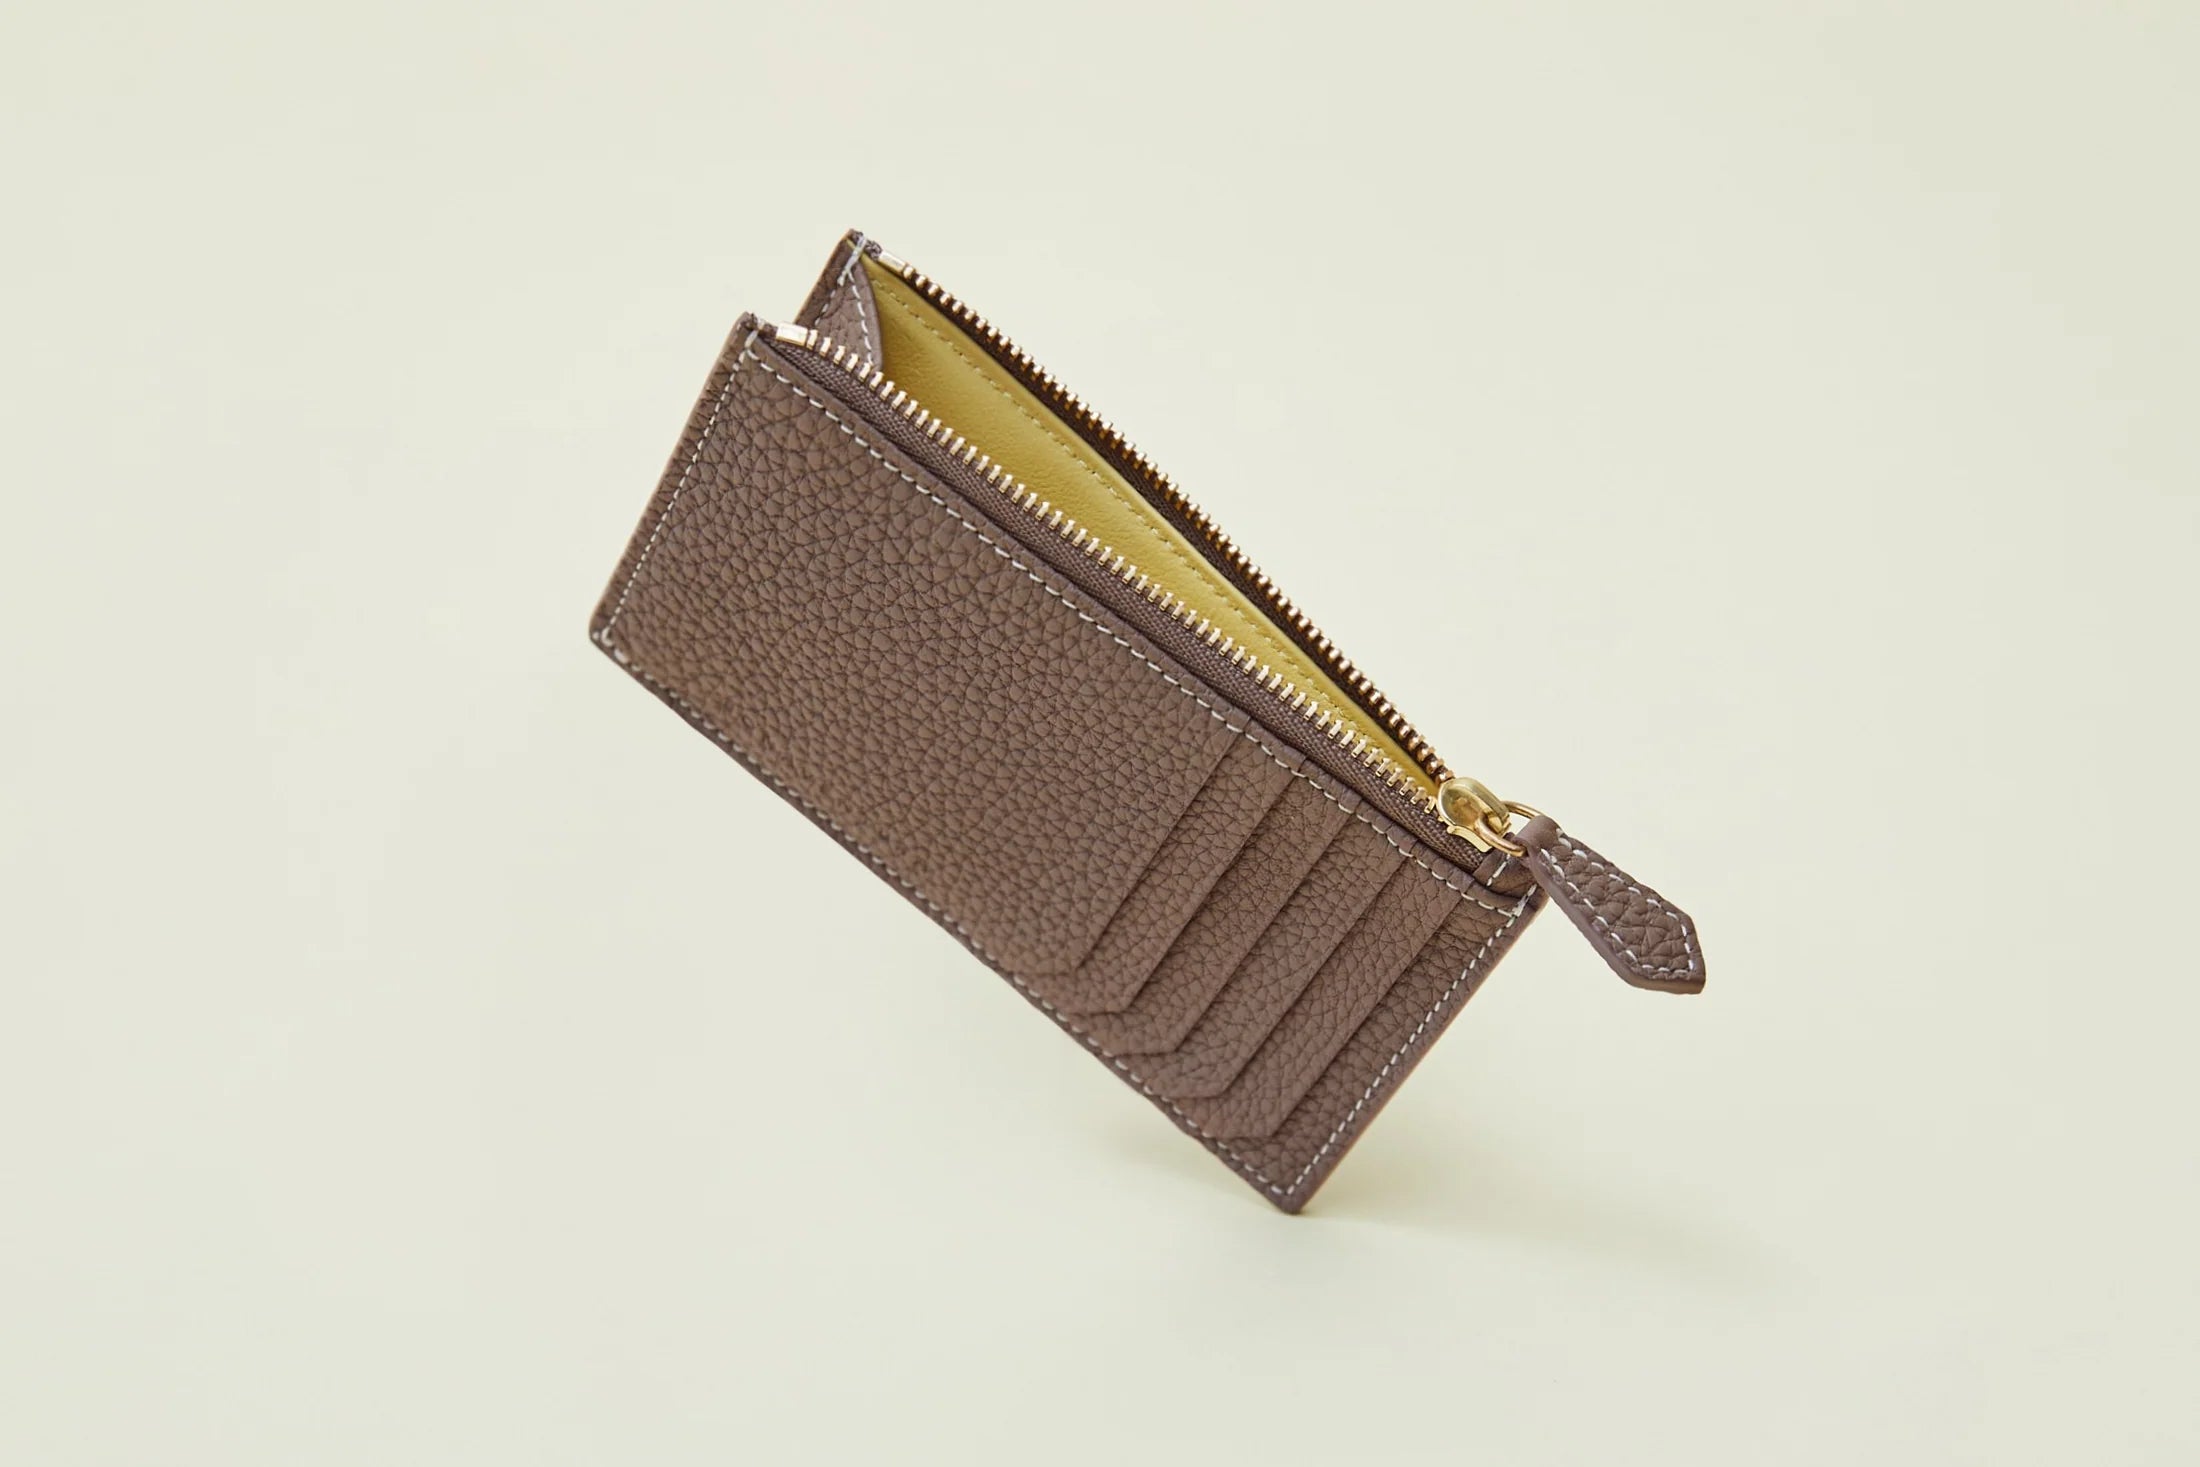 Detailed view of BONAVENTURA leather wallet made with high-quality Fjord leather.